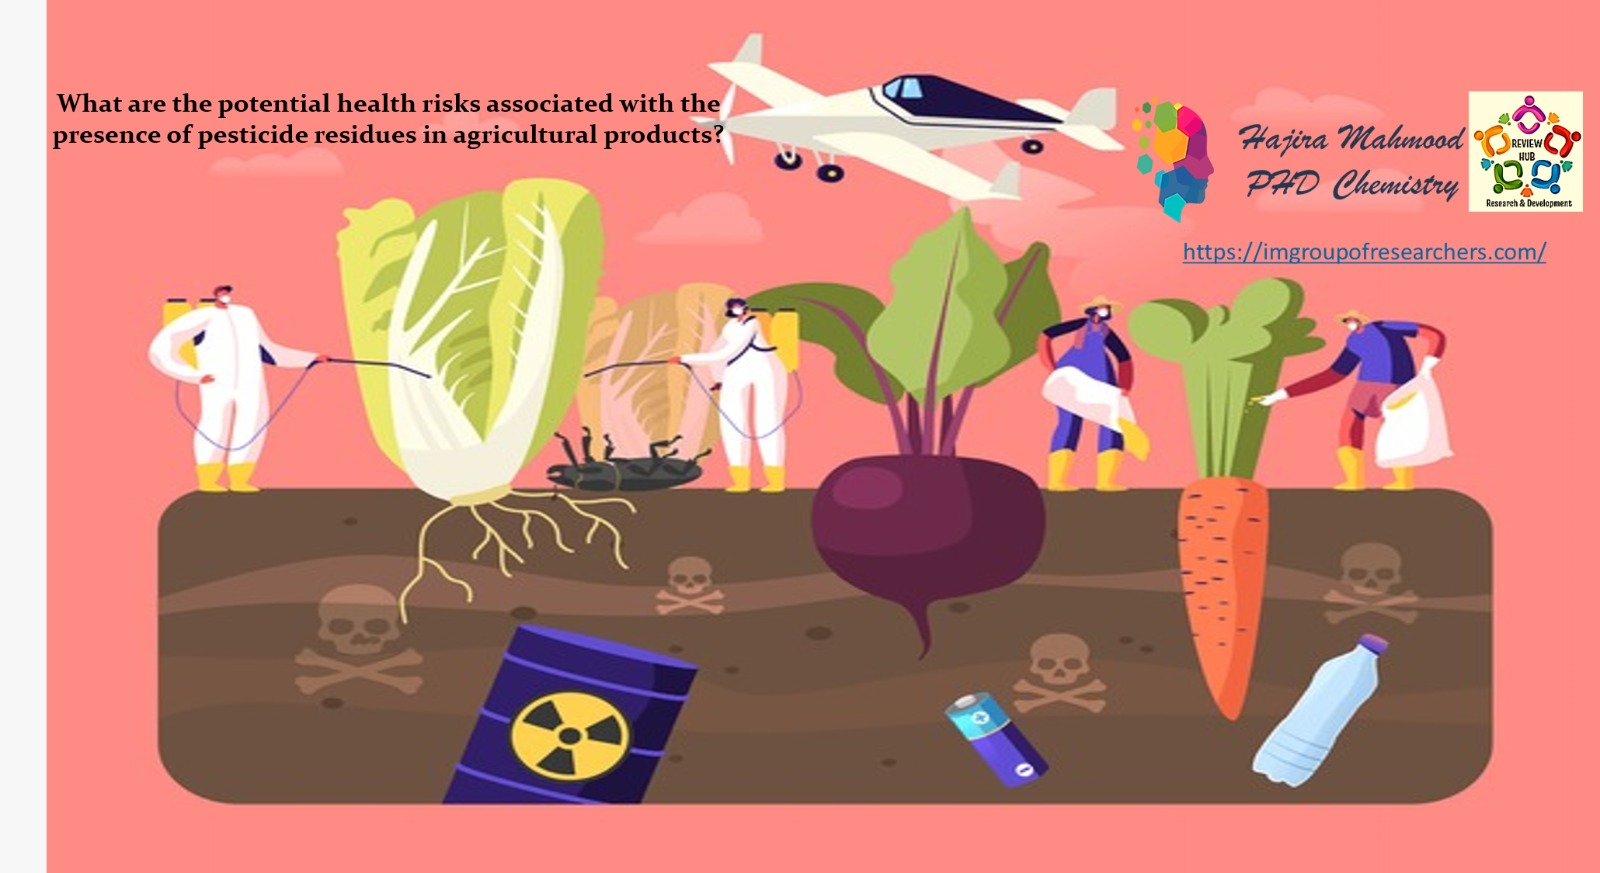 What are the potential health risks associated with the presence of pesticide residues in agricultural products?